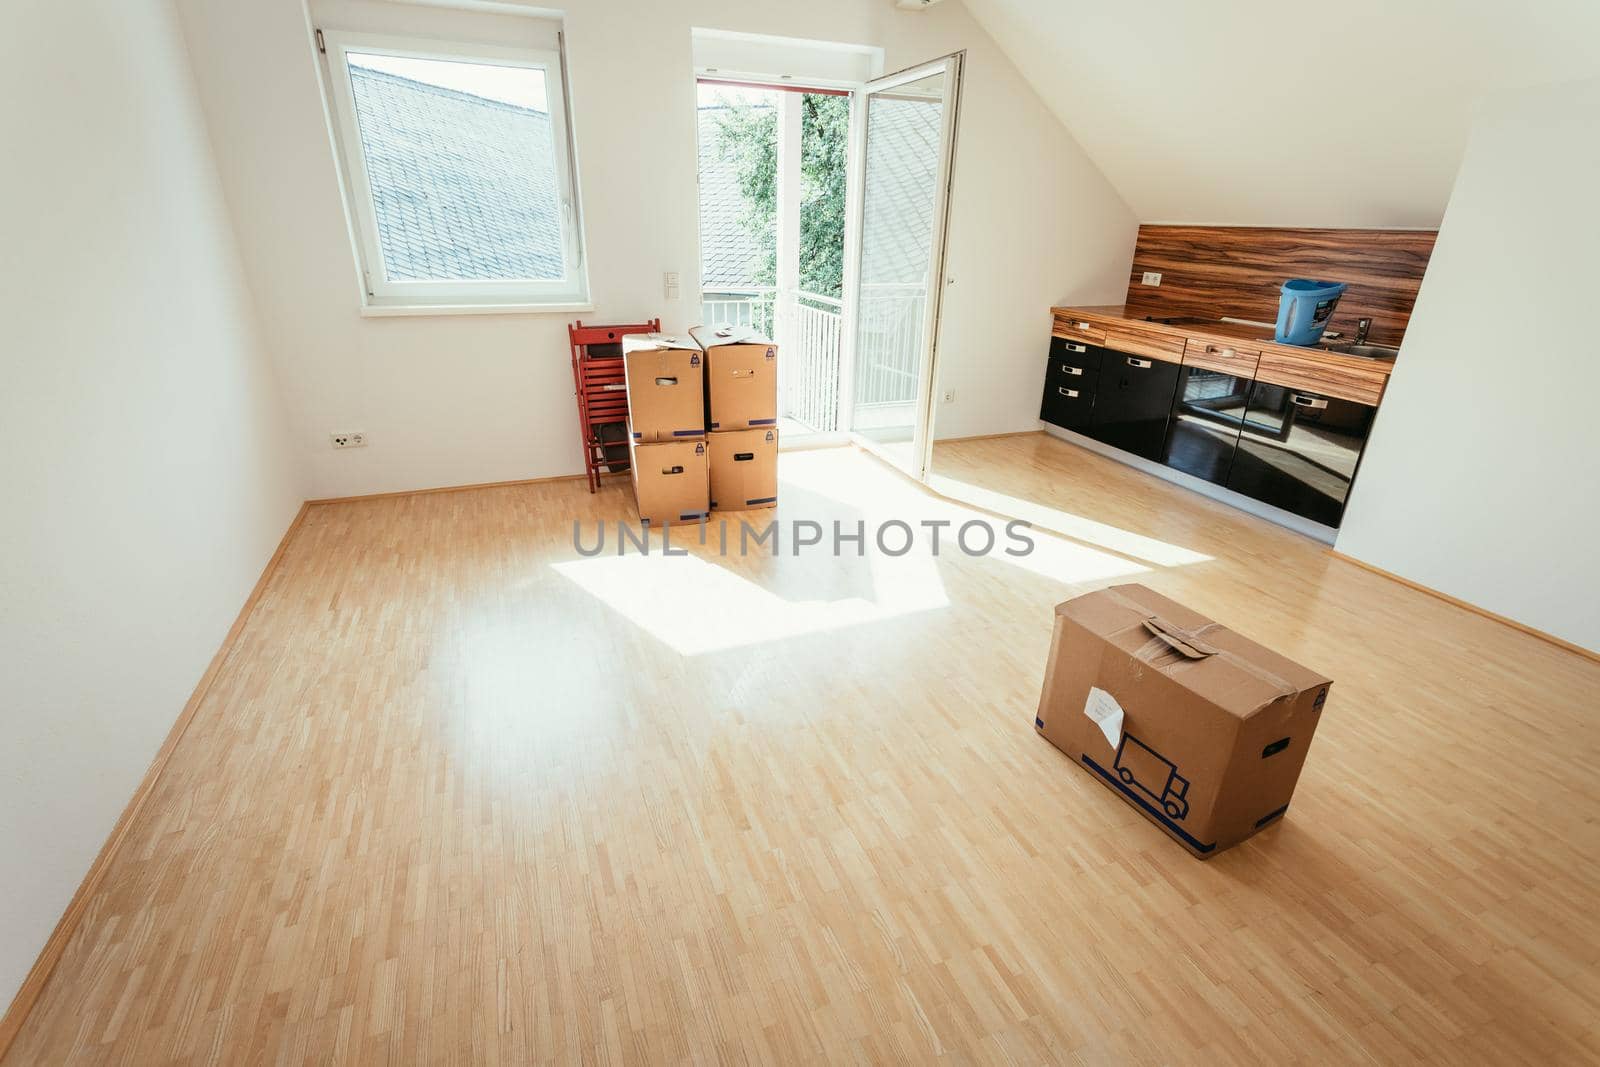 Move. Cardboard, boxes for moving into a new, clean and bright home by Daxenbichler